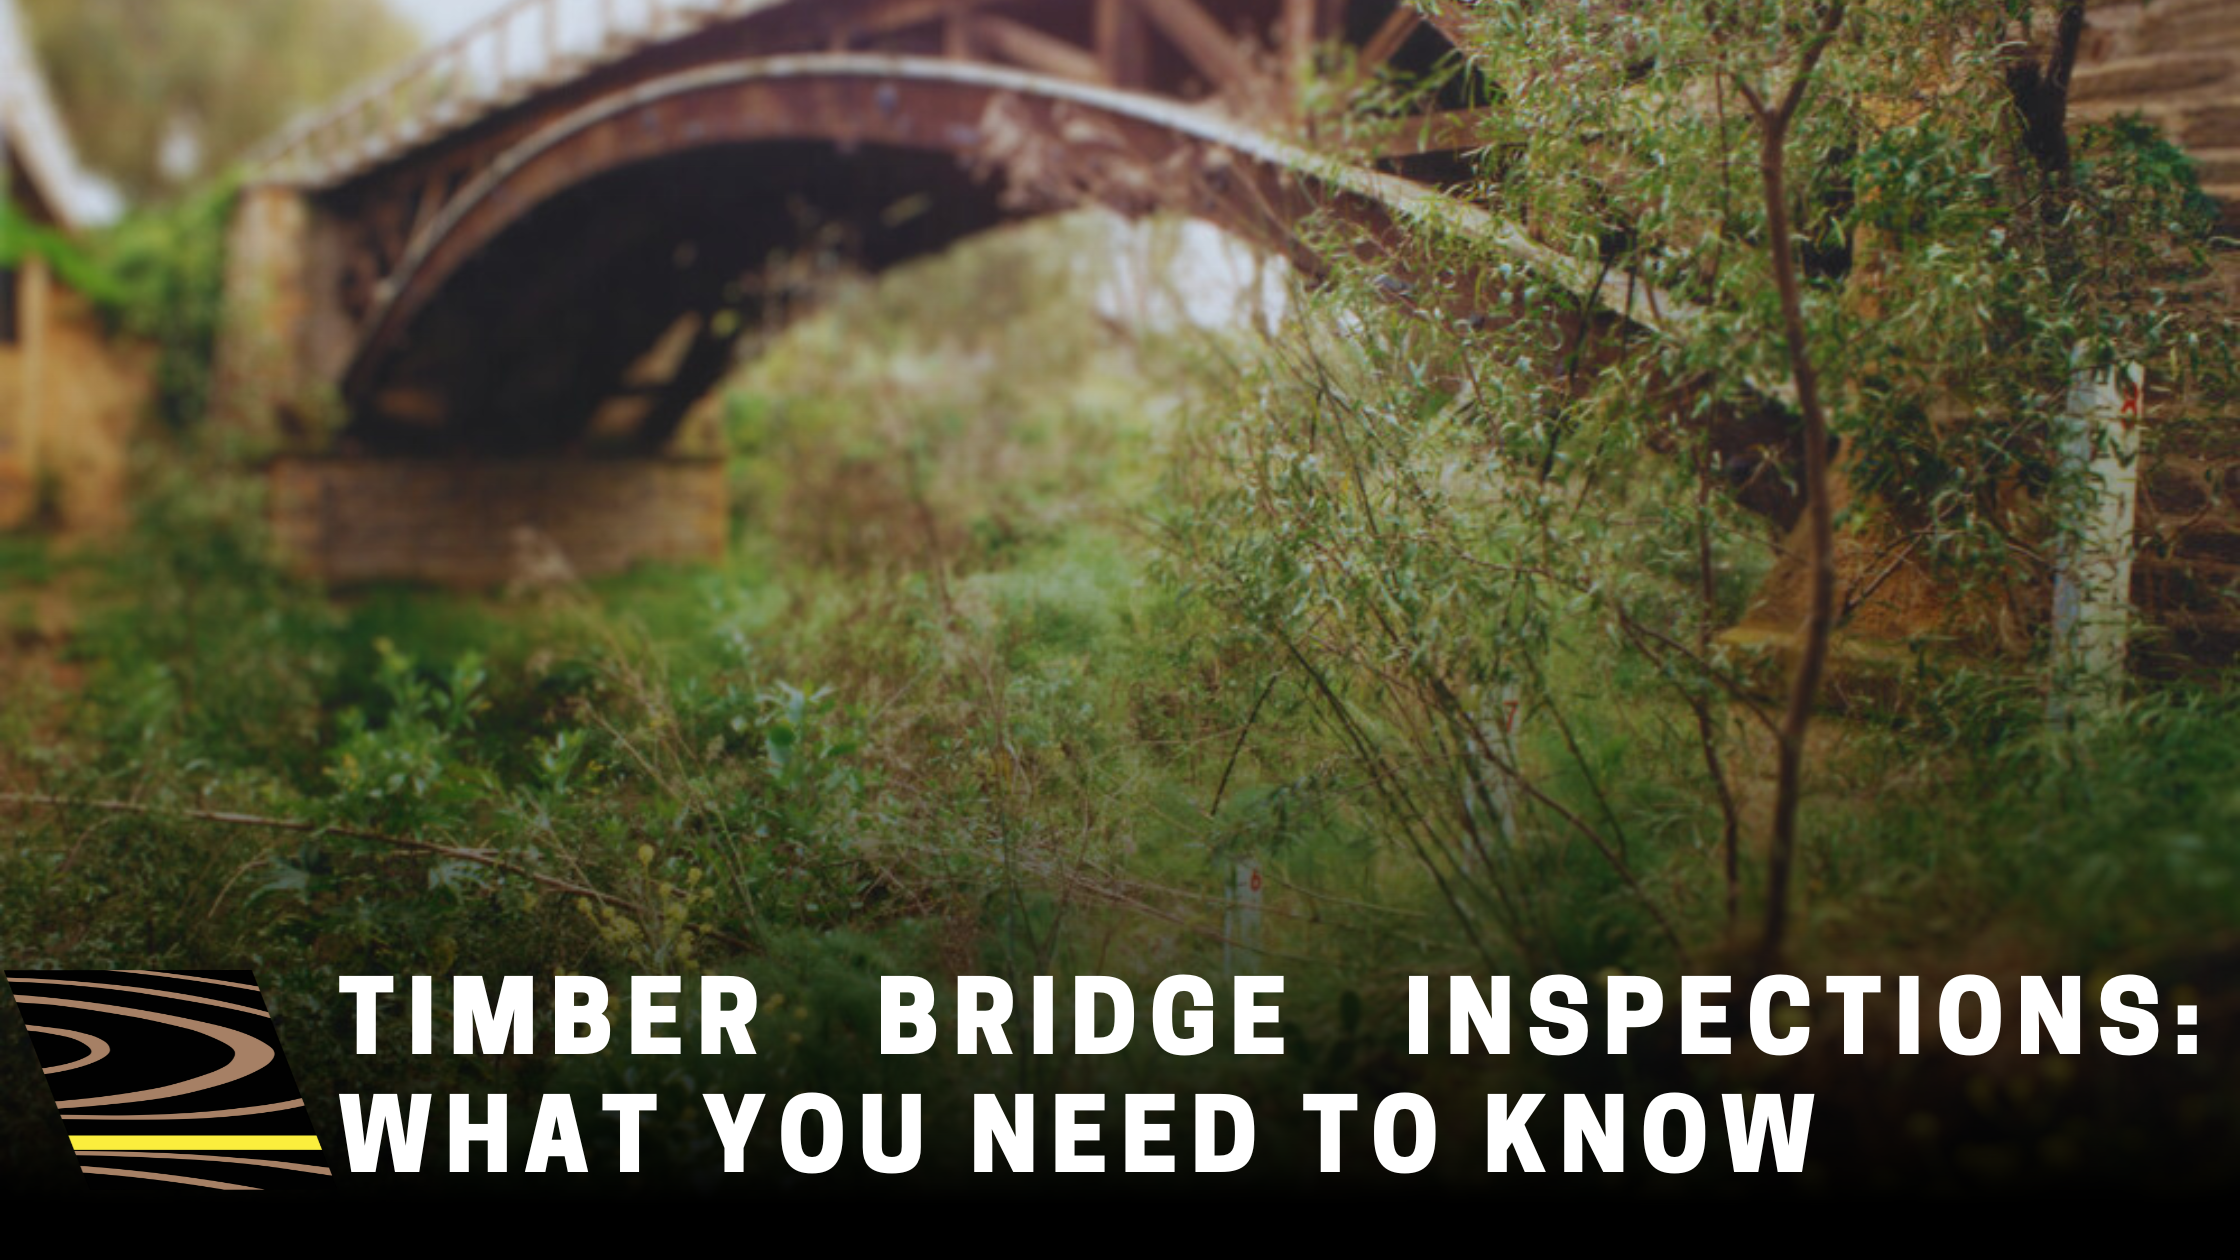 Angle Vale bridge in Australia before it collapsed. cover image for a blog post on Timber Bridge inspections